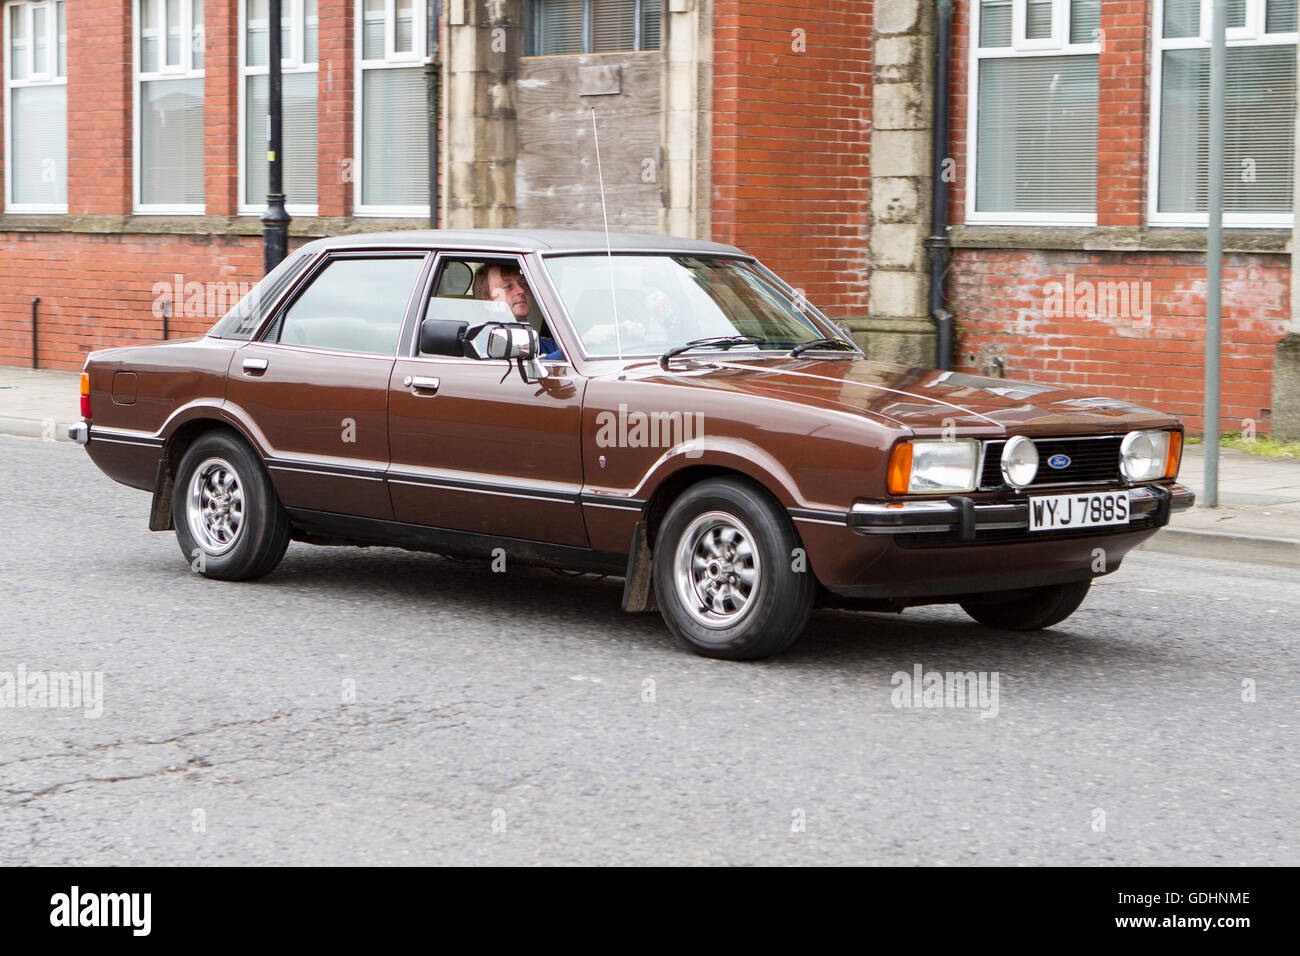 WYJ788S brown 1978 Ford Cortina Ghia Auto; Tram Sunday, Fleetwood,  Lancashire, UK. 17-07-2016. Vintage, classic, collectible, heritage,  historics, prestige, cherished yesteryear vehicles car club motors annual  event Stock Photo - Alamy